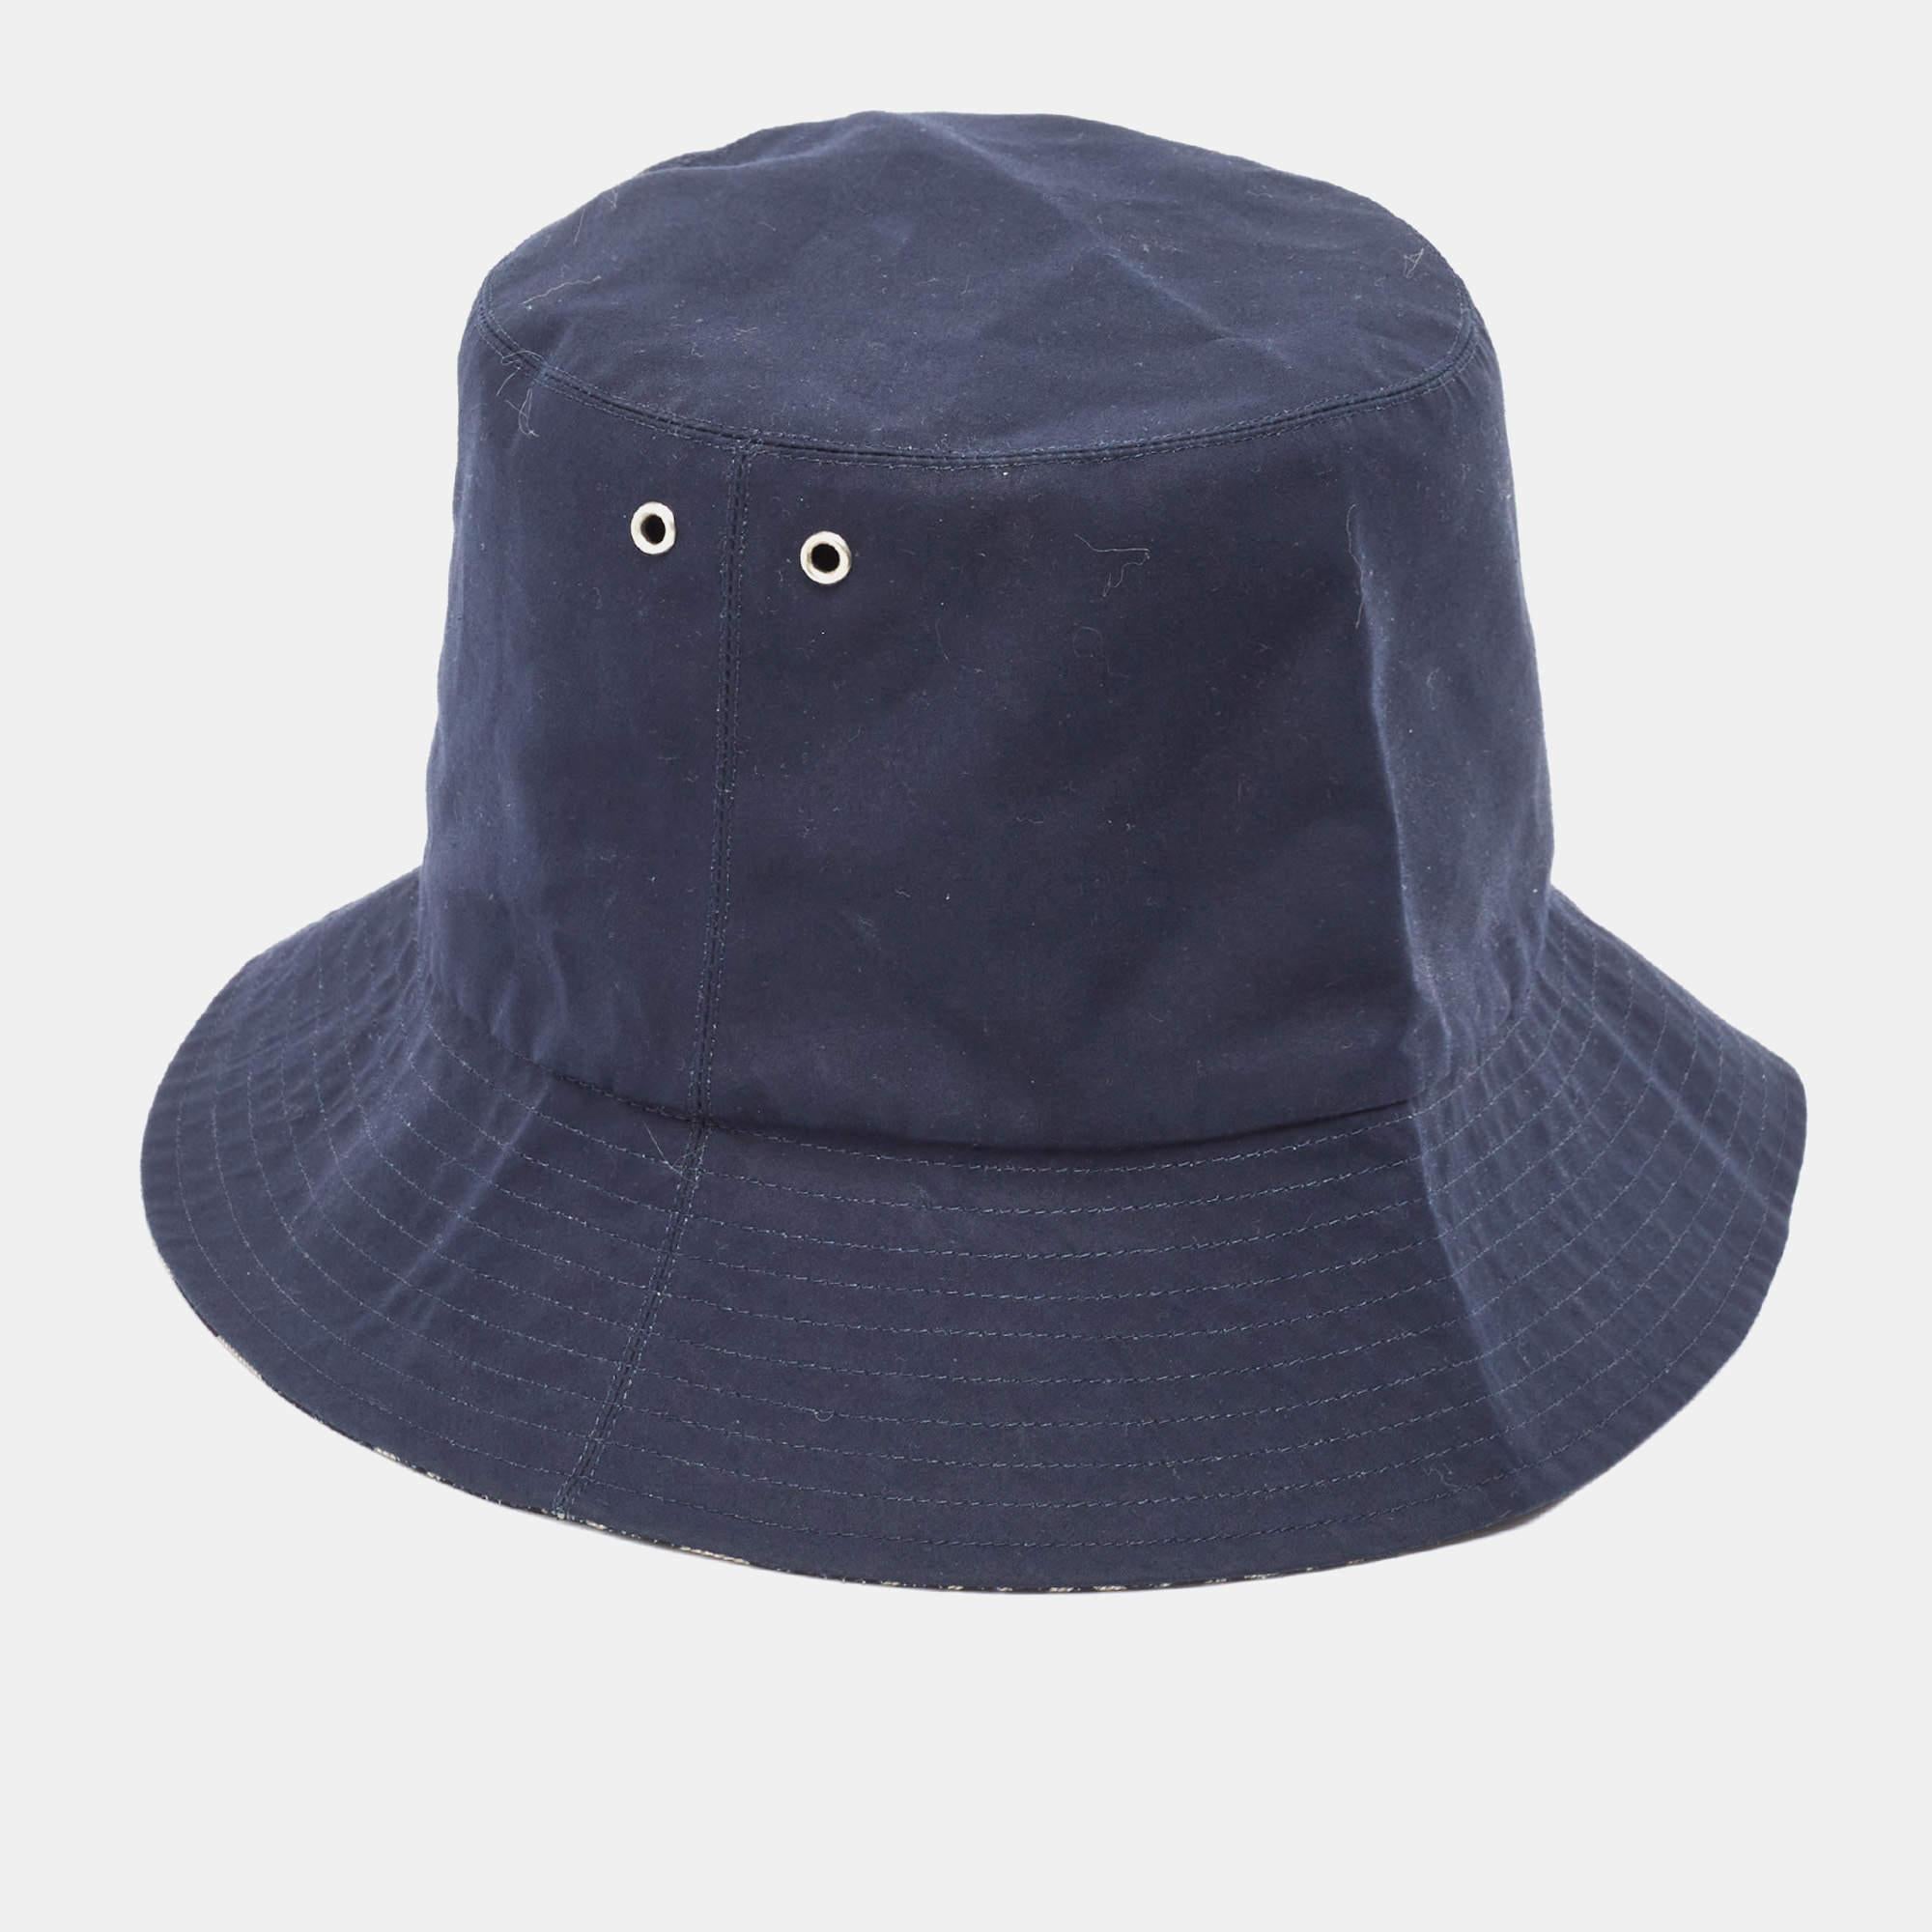 The Dior hat exudes effortless style with its versatile design. Crafted with the iconic Oblique pattern, it offers a chic navy blue hue on one side and a cozy teddy fabric on the other. Perfect for adding a touch of luxury to any casual ensemble.

